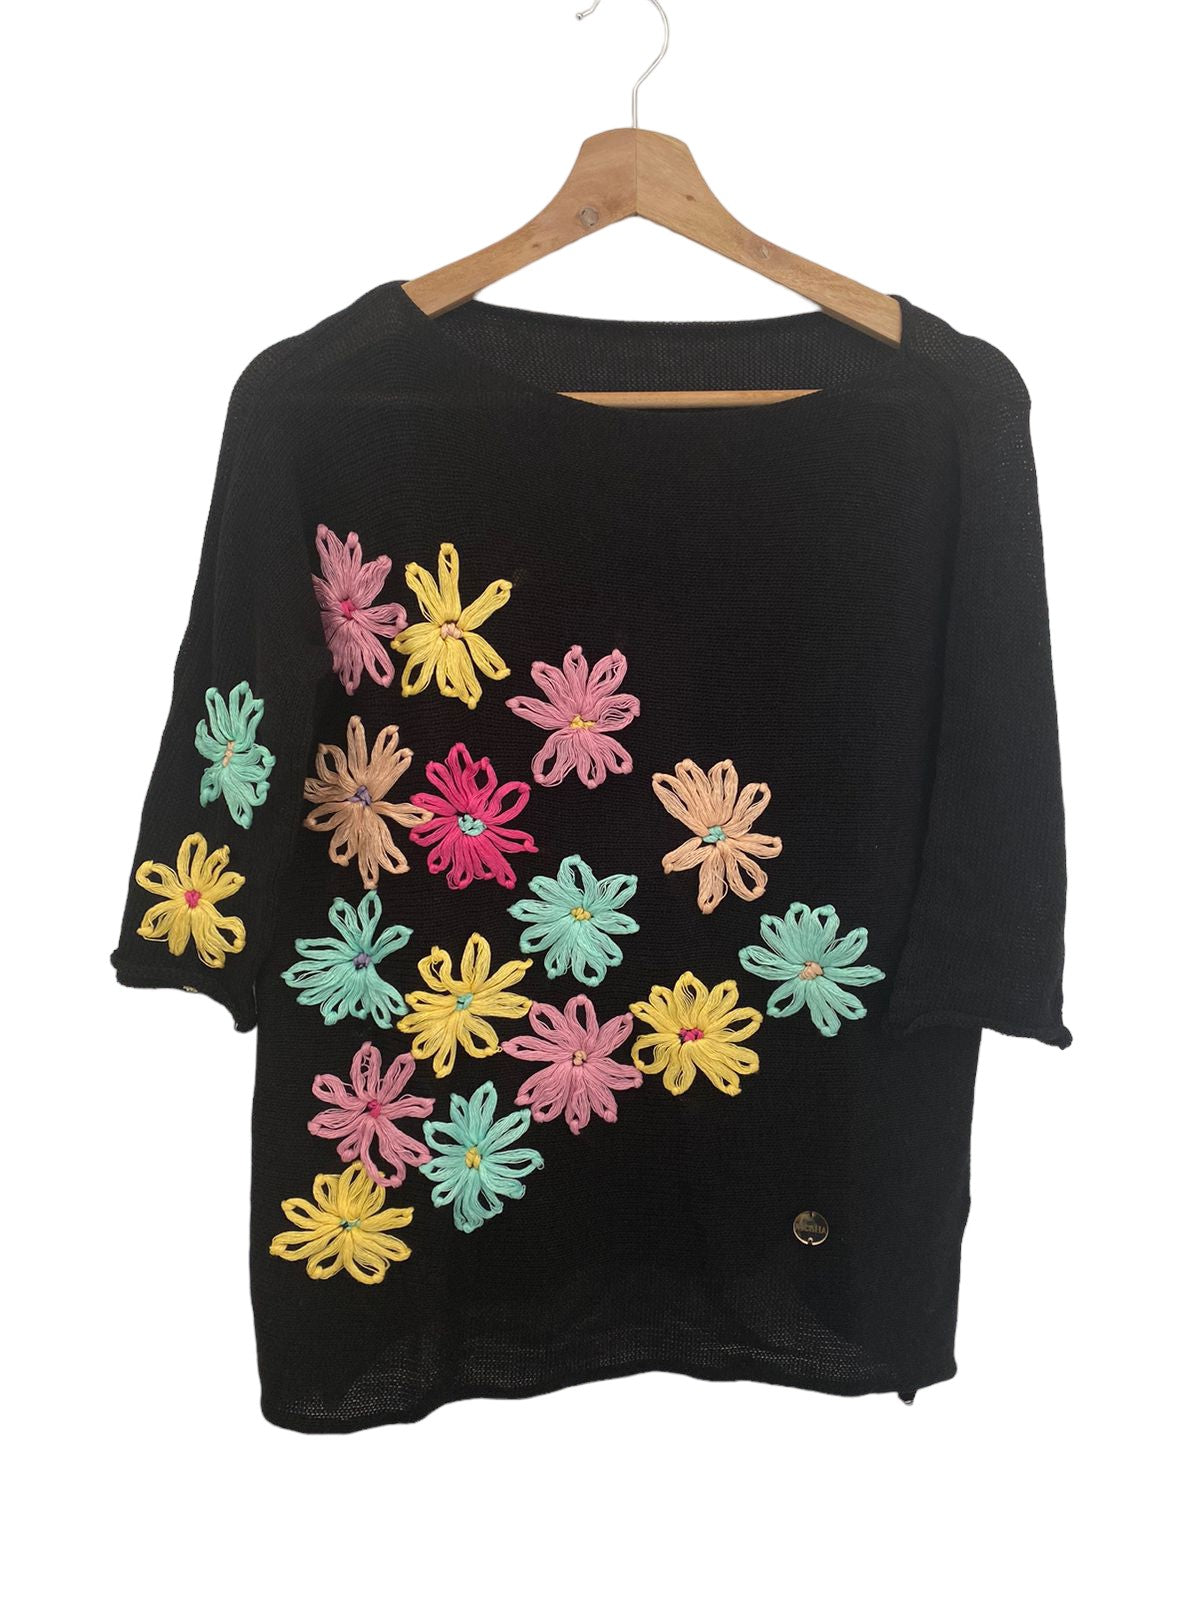 Sweater Madrigal Negro Flores Calipso